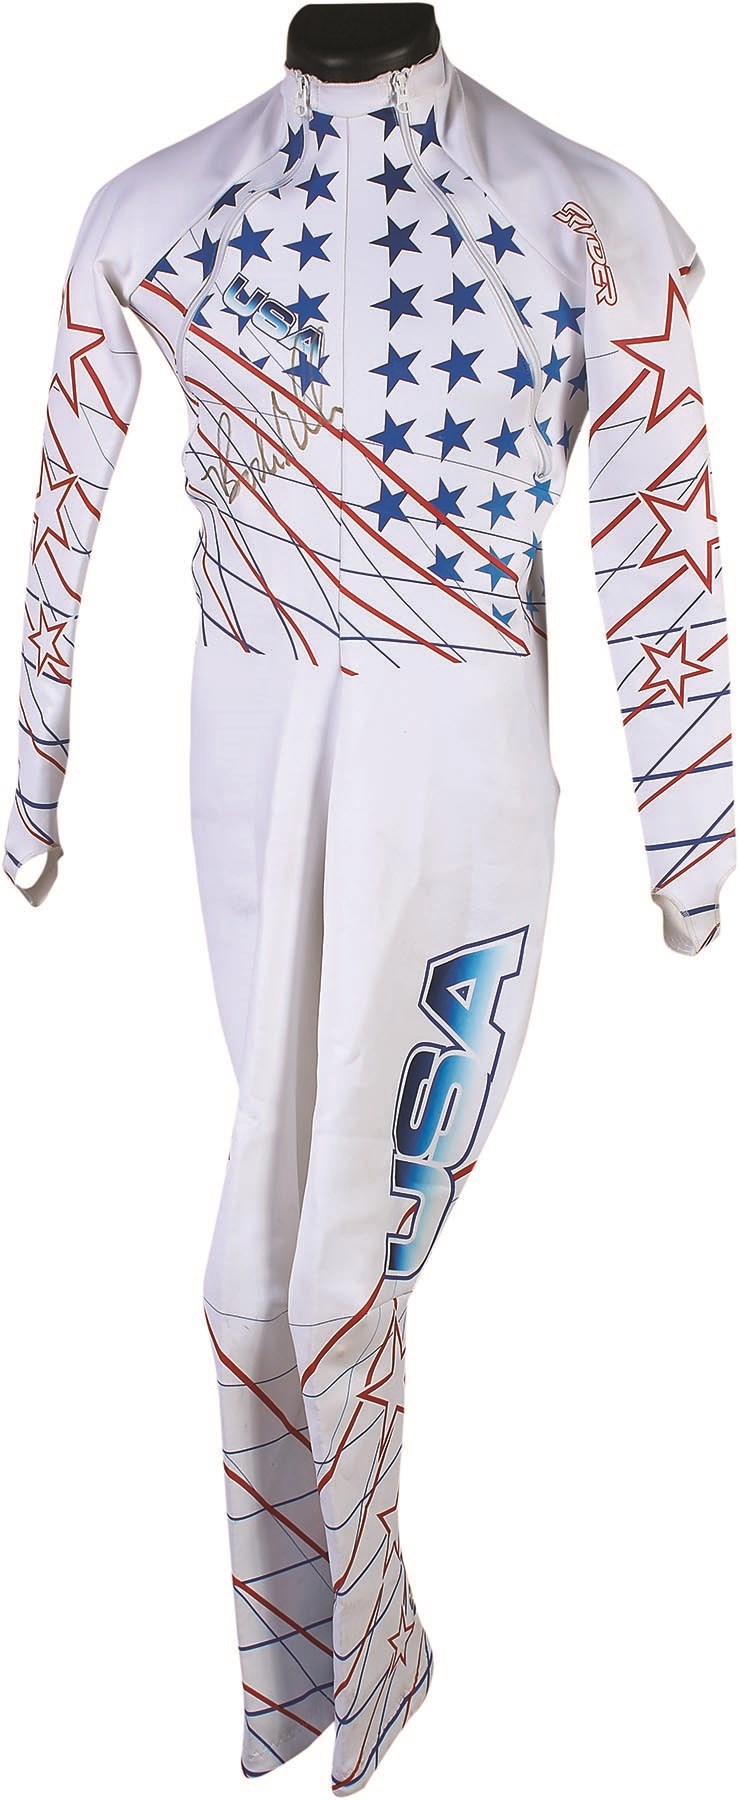 Olympics and All Sports - Bode Miller Signed 2014 Sochi Olympics Race Worn Suit